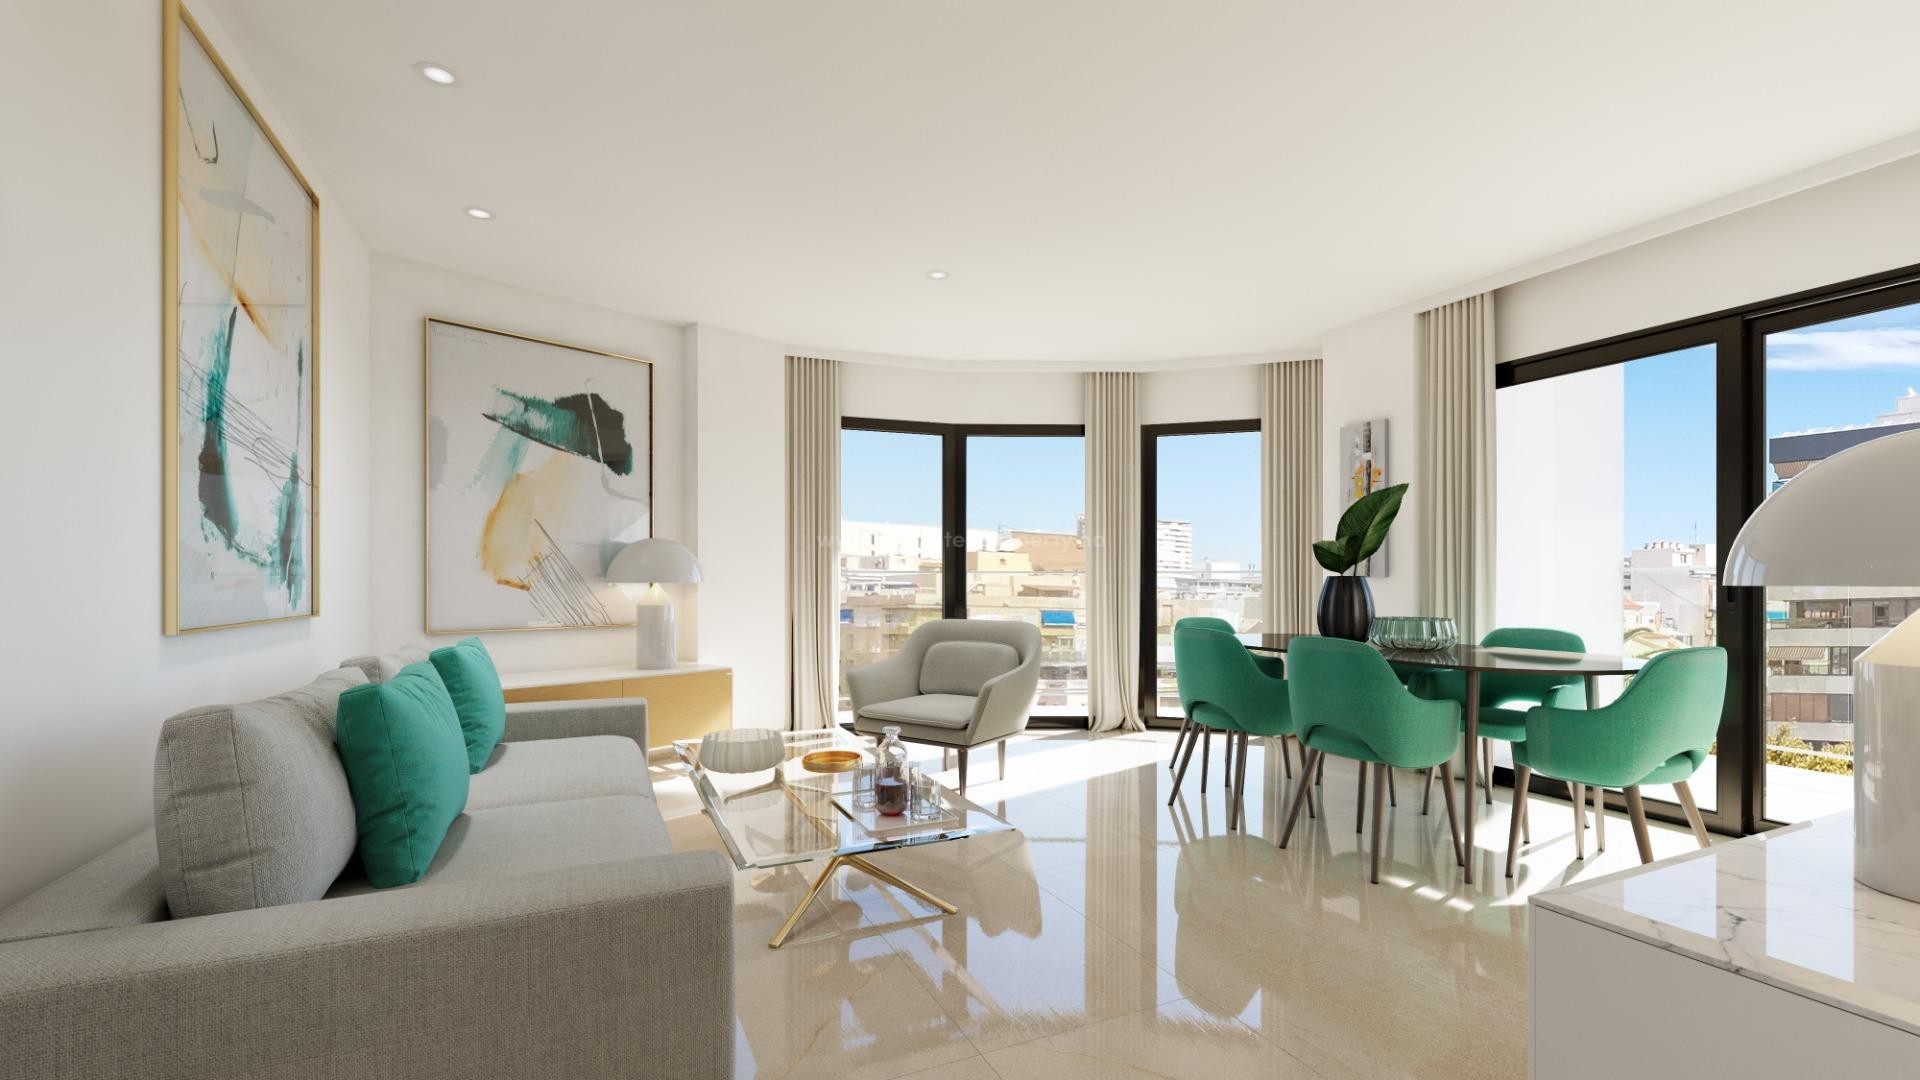 Alicante city, apartments and penthouses, 2/3/4 bedrooms in La Florida, roof terrace with swimming pool, shared garden with playground and green areas.